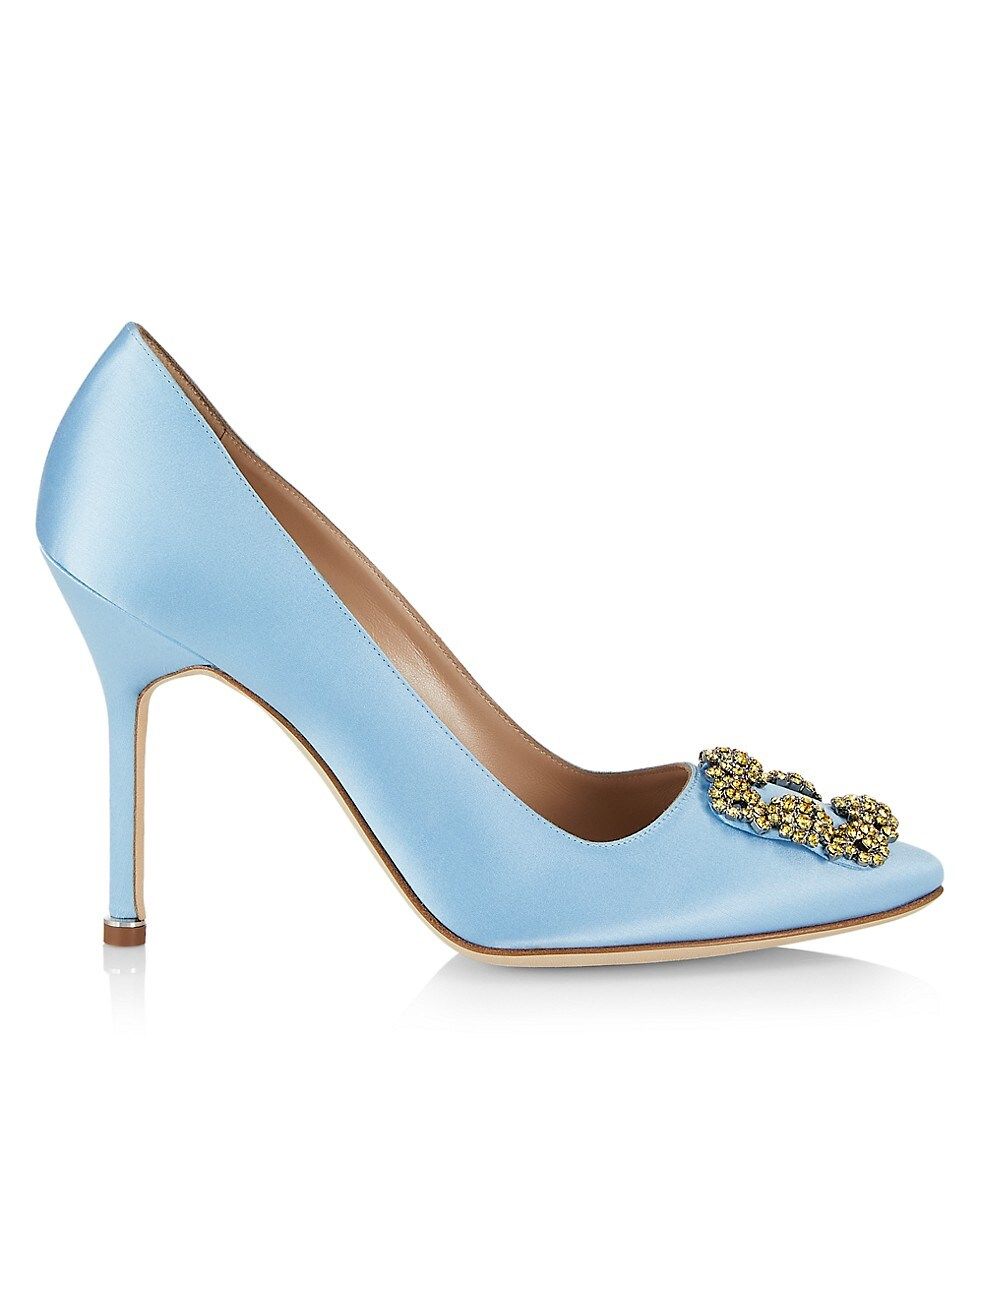 Hangisi Oply 105MM Satin Pumps | Saks Fifth Avenue